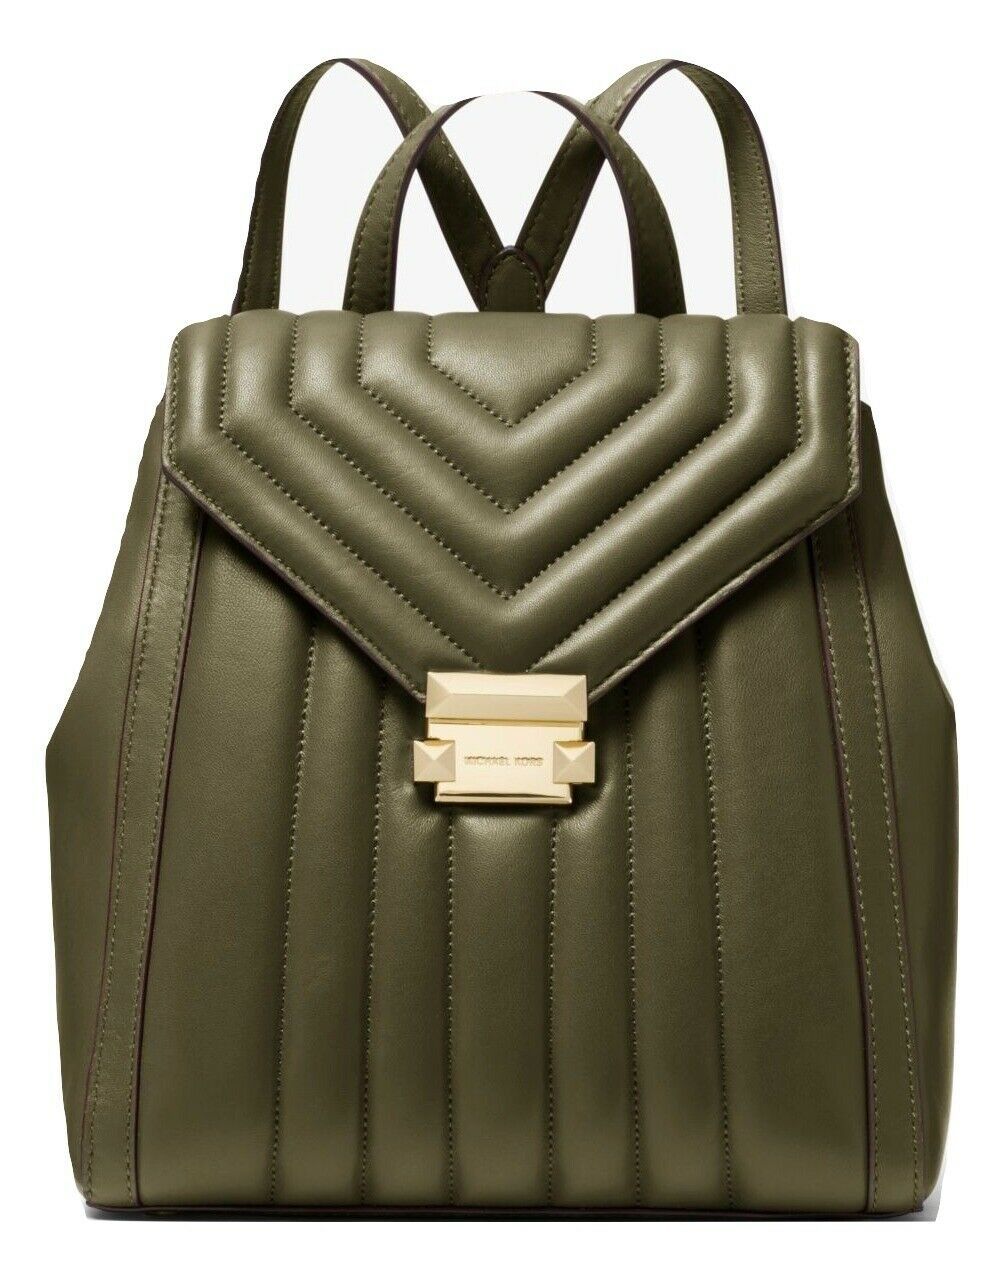 MICHAEL MICHAEL KORS Whitney Quilted Leather Backpack MSRP: $358.00 - $257.39